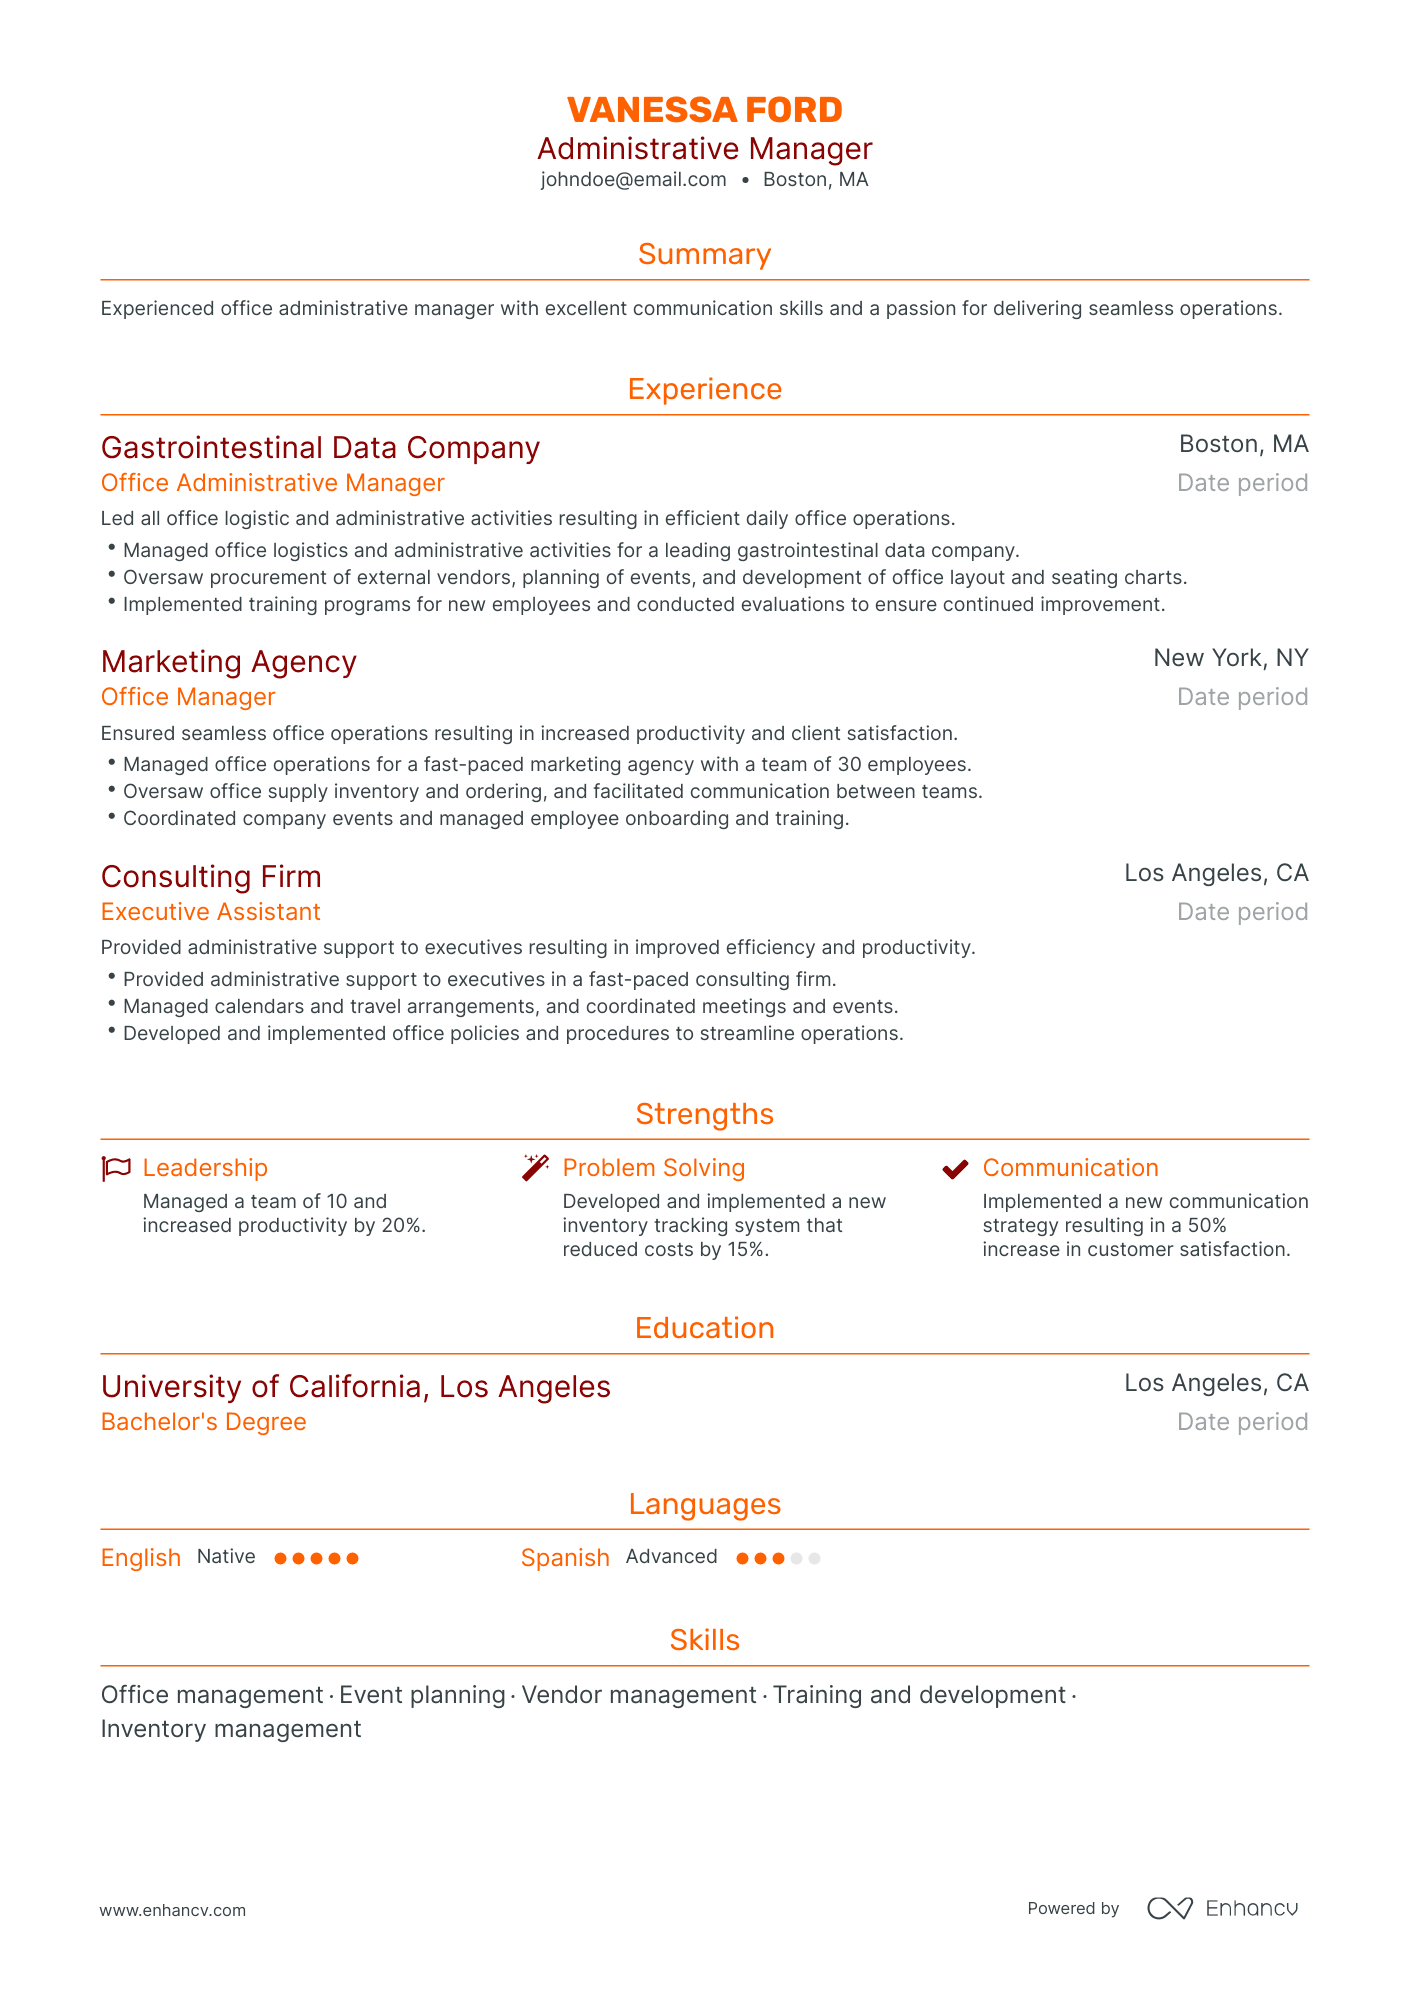 Traditional Administrative Manager Resume Template